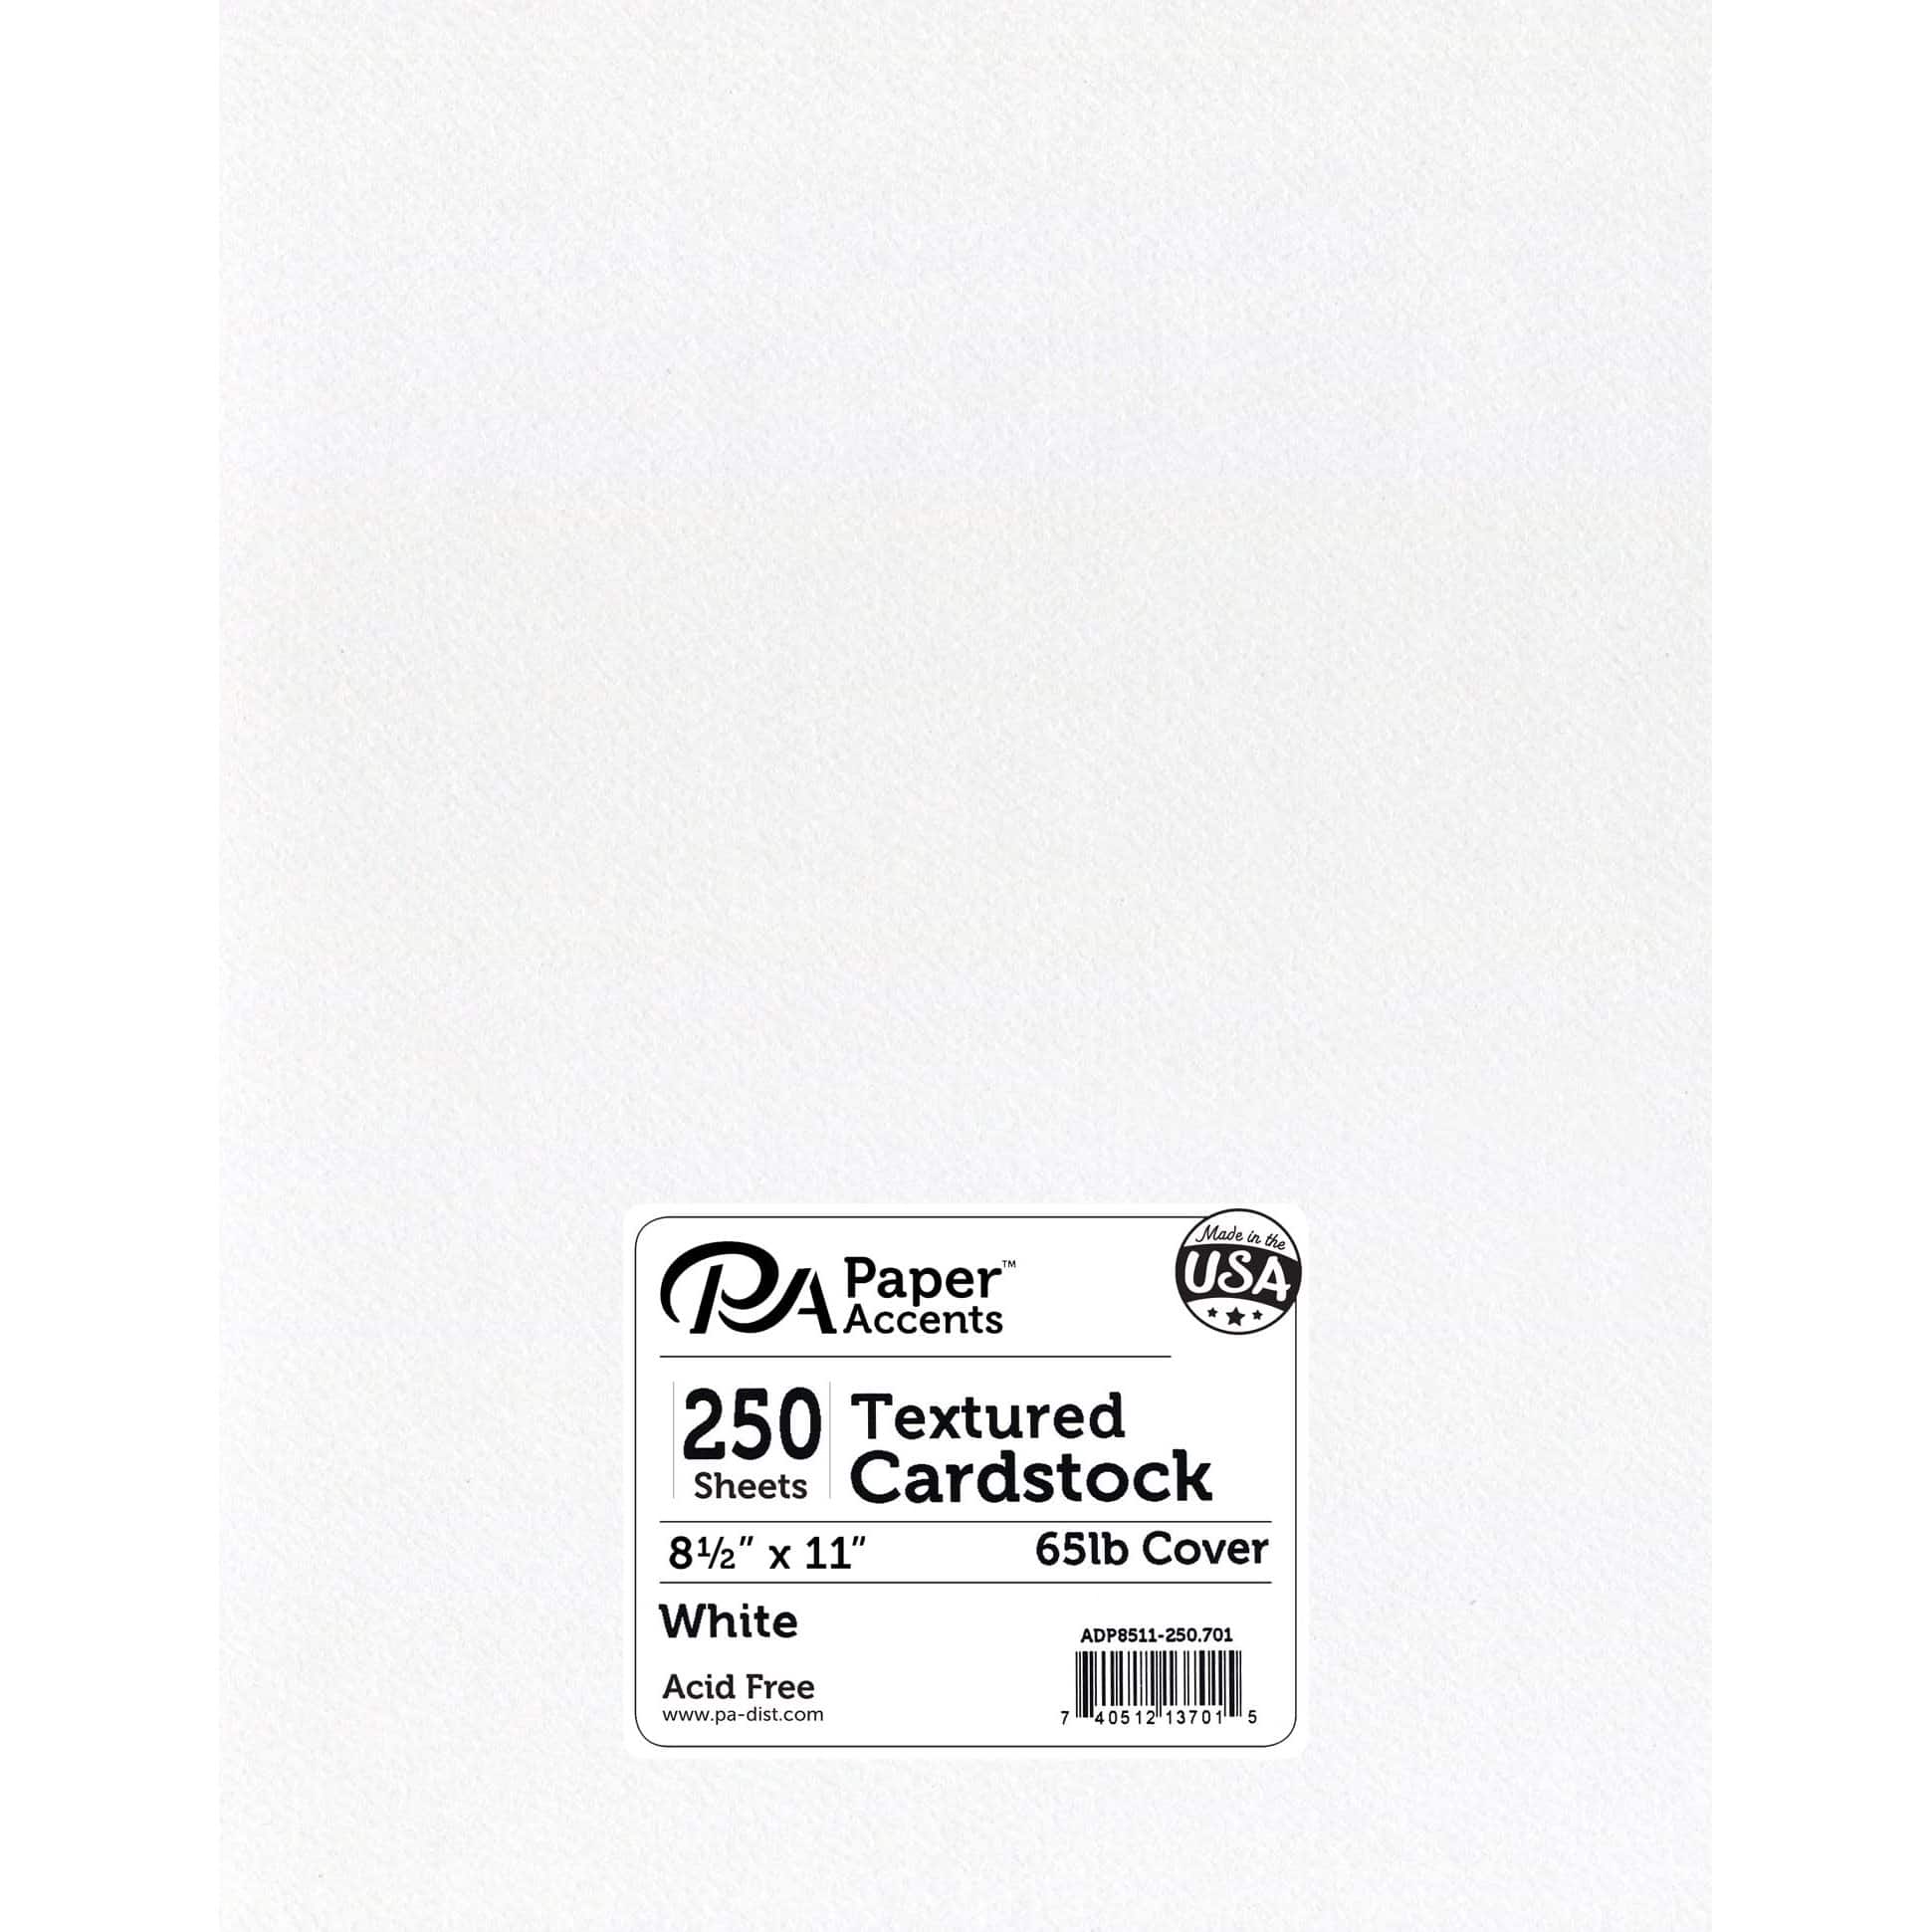 PA Paper™ Accents White 8.5 x 11 65lb. Smooth Cardstock, 25 Sheets -  740512851287